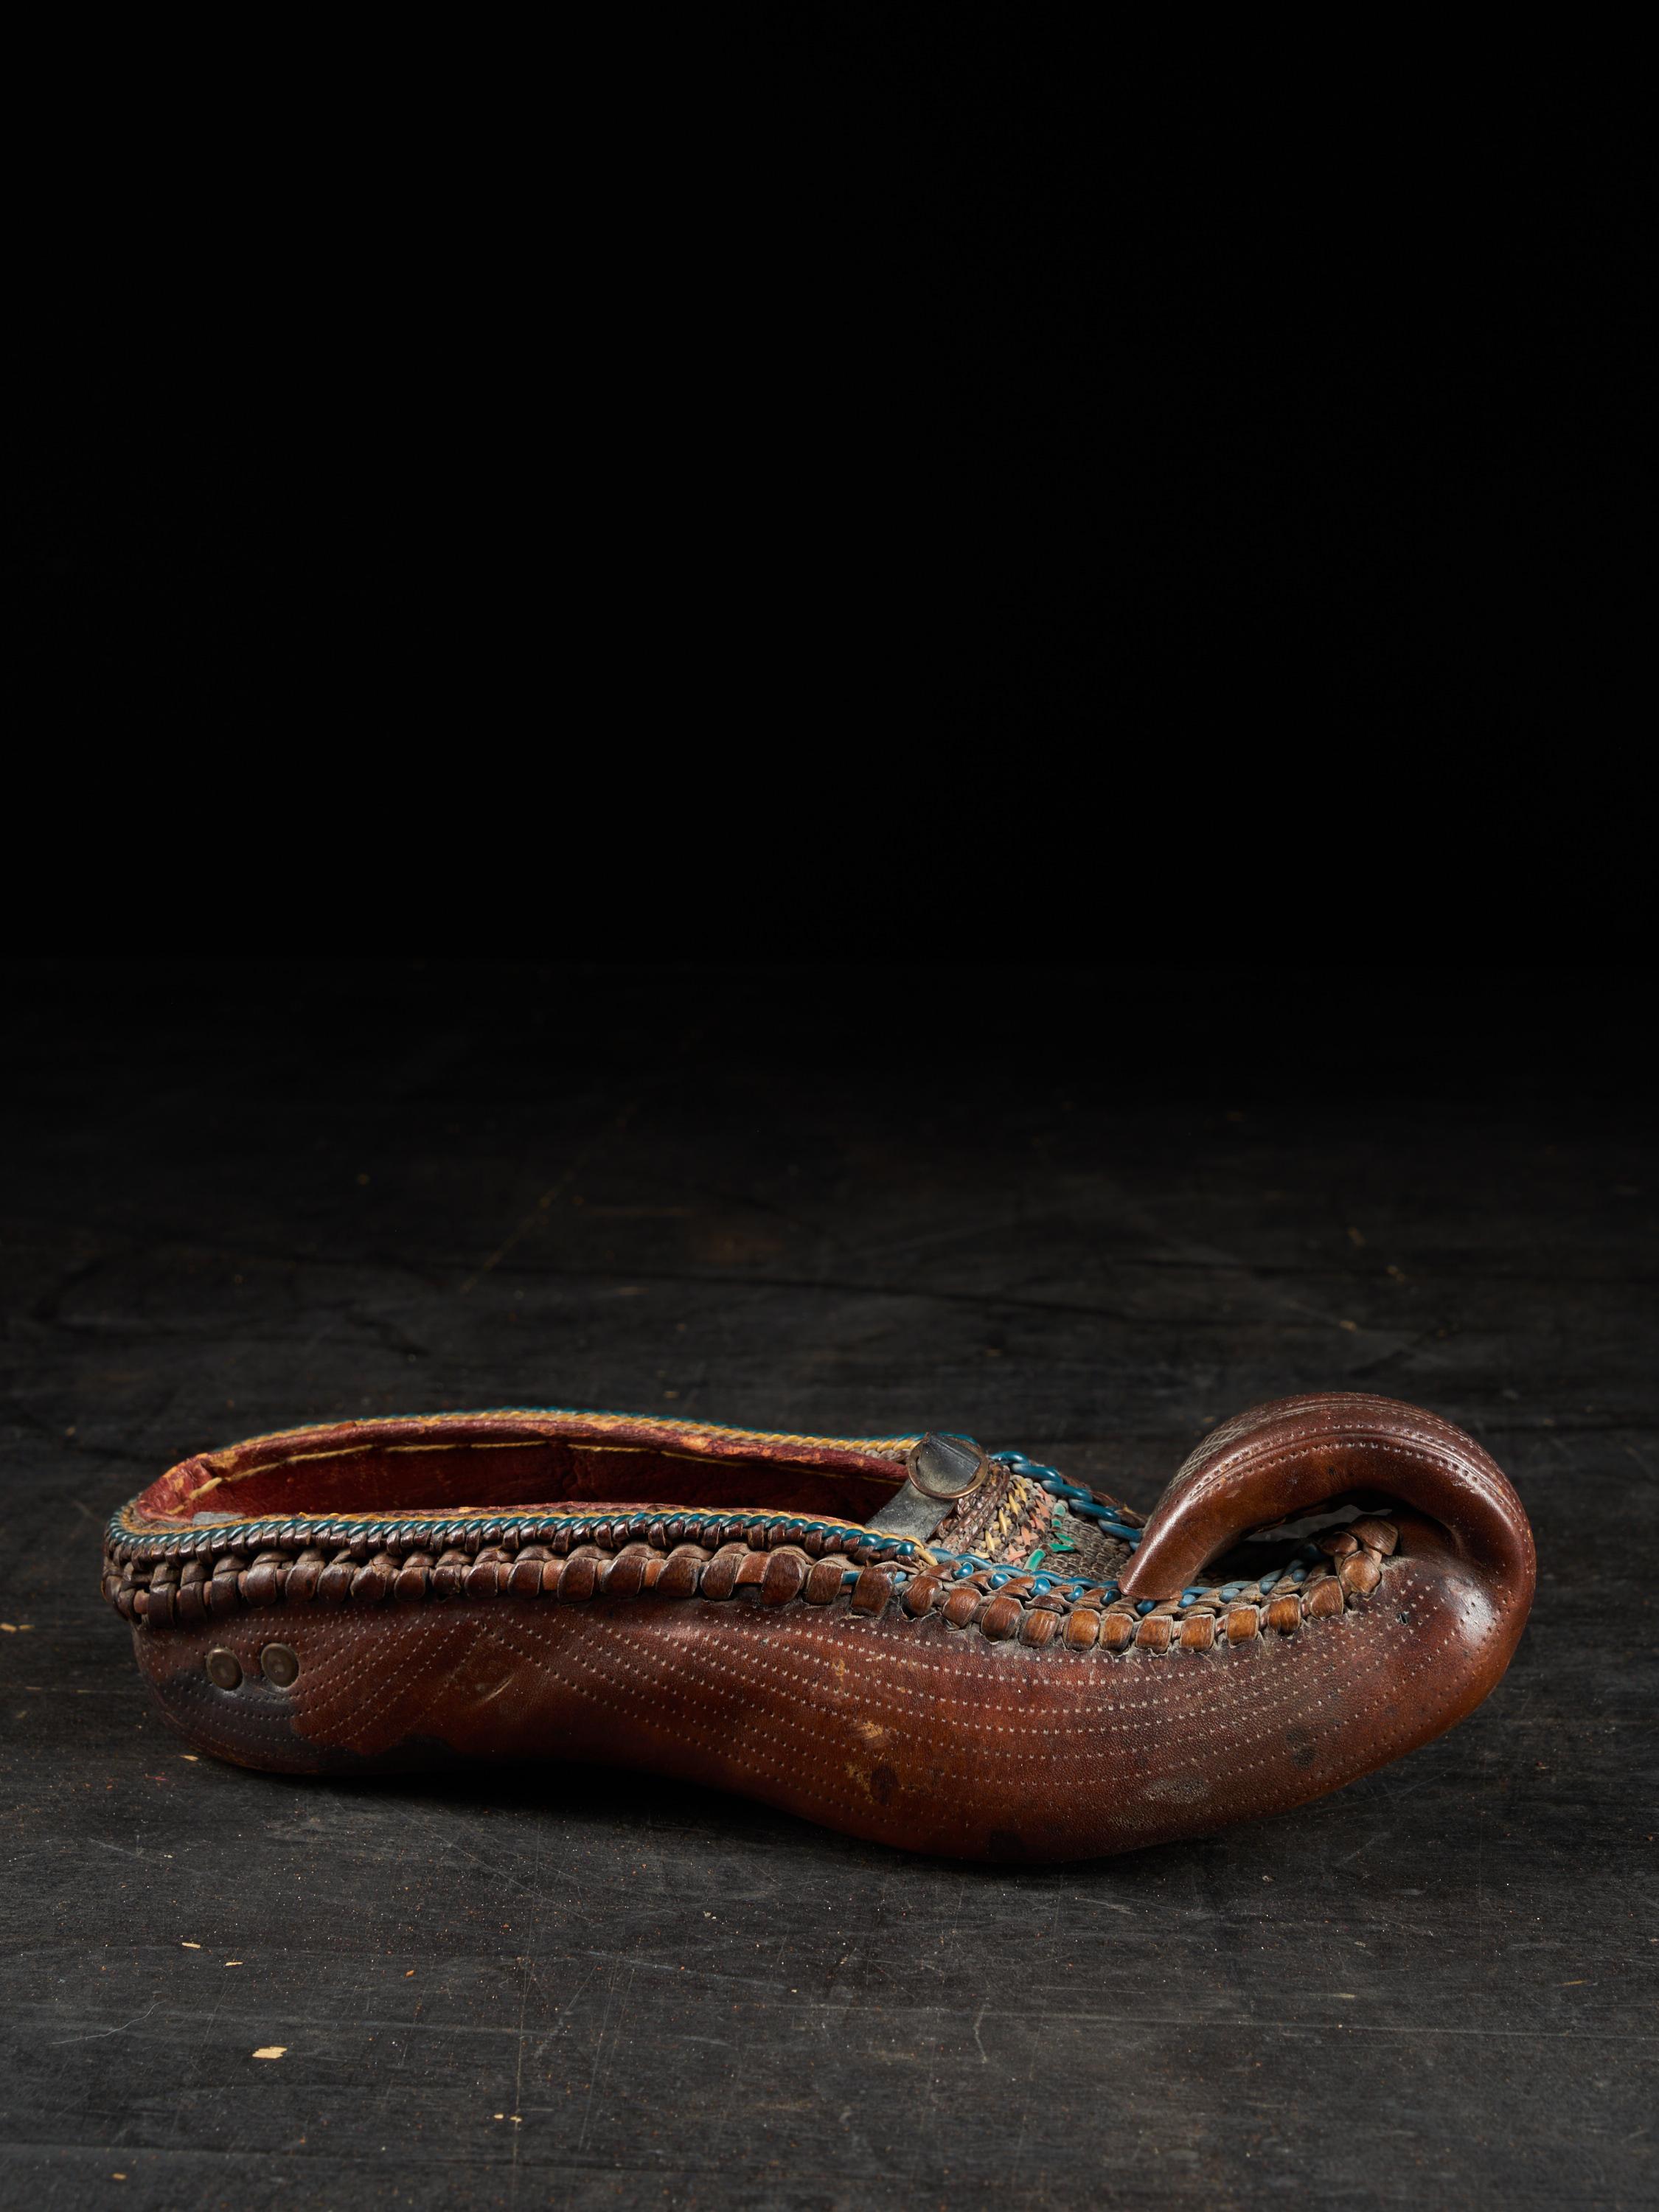 Beautiful leather shoe from Eastern Europe tracing back to the 19th century. This vintage item features delicate and detailed patterns. A beautiful item steeped in history that will delight collectors.